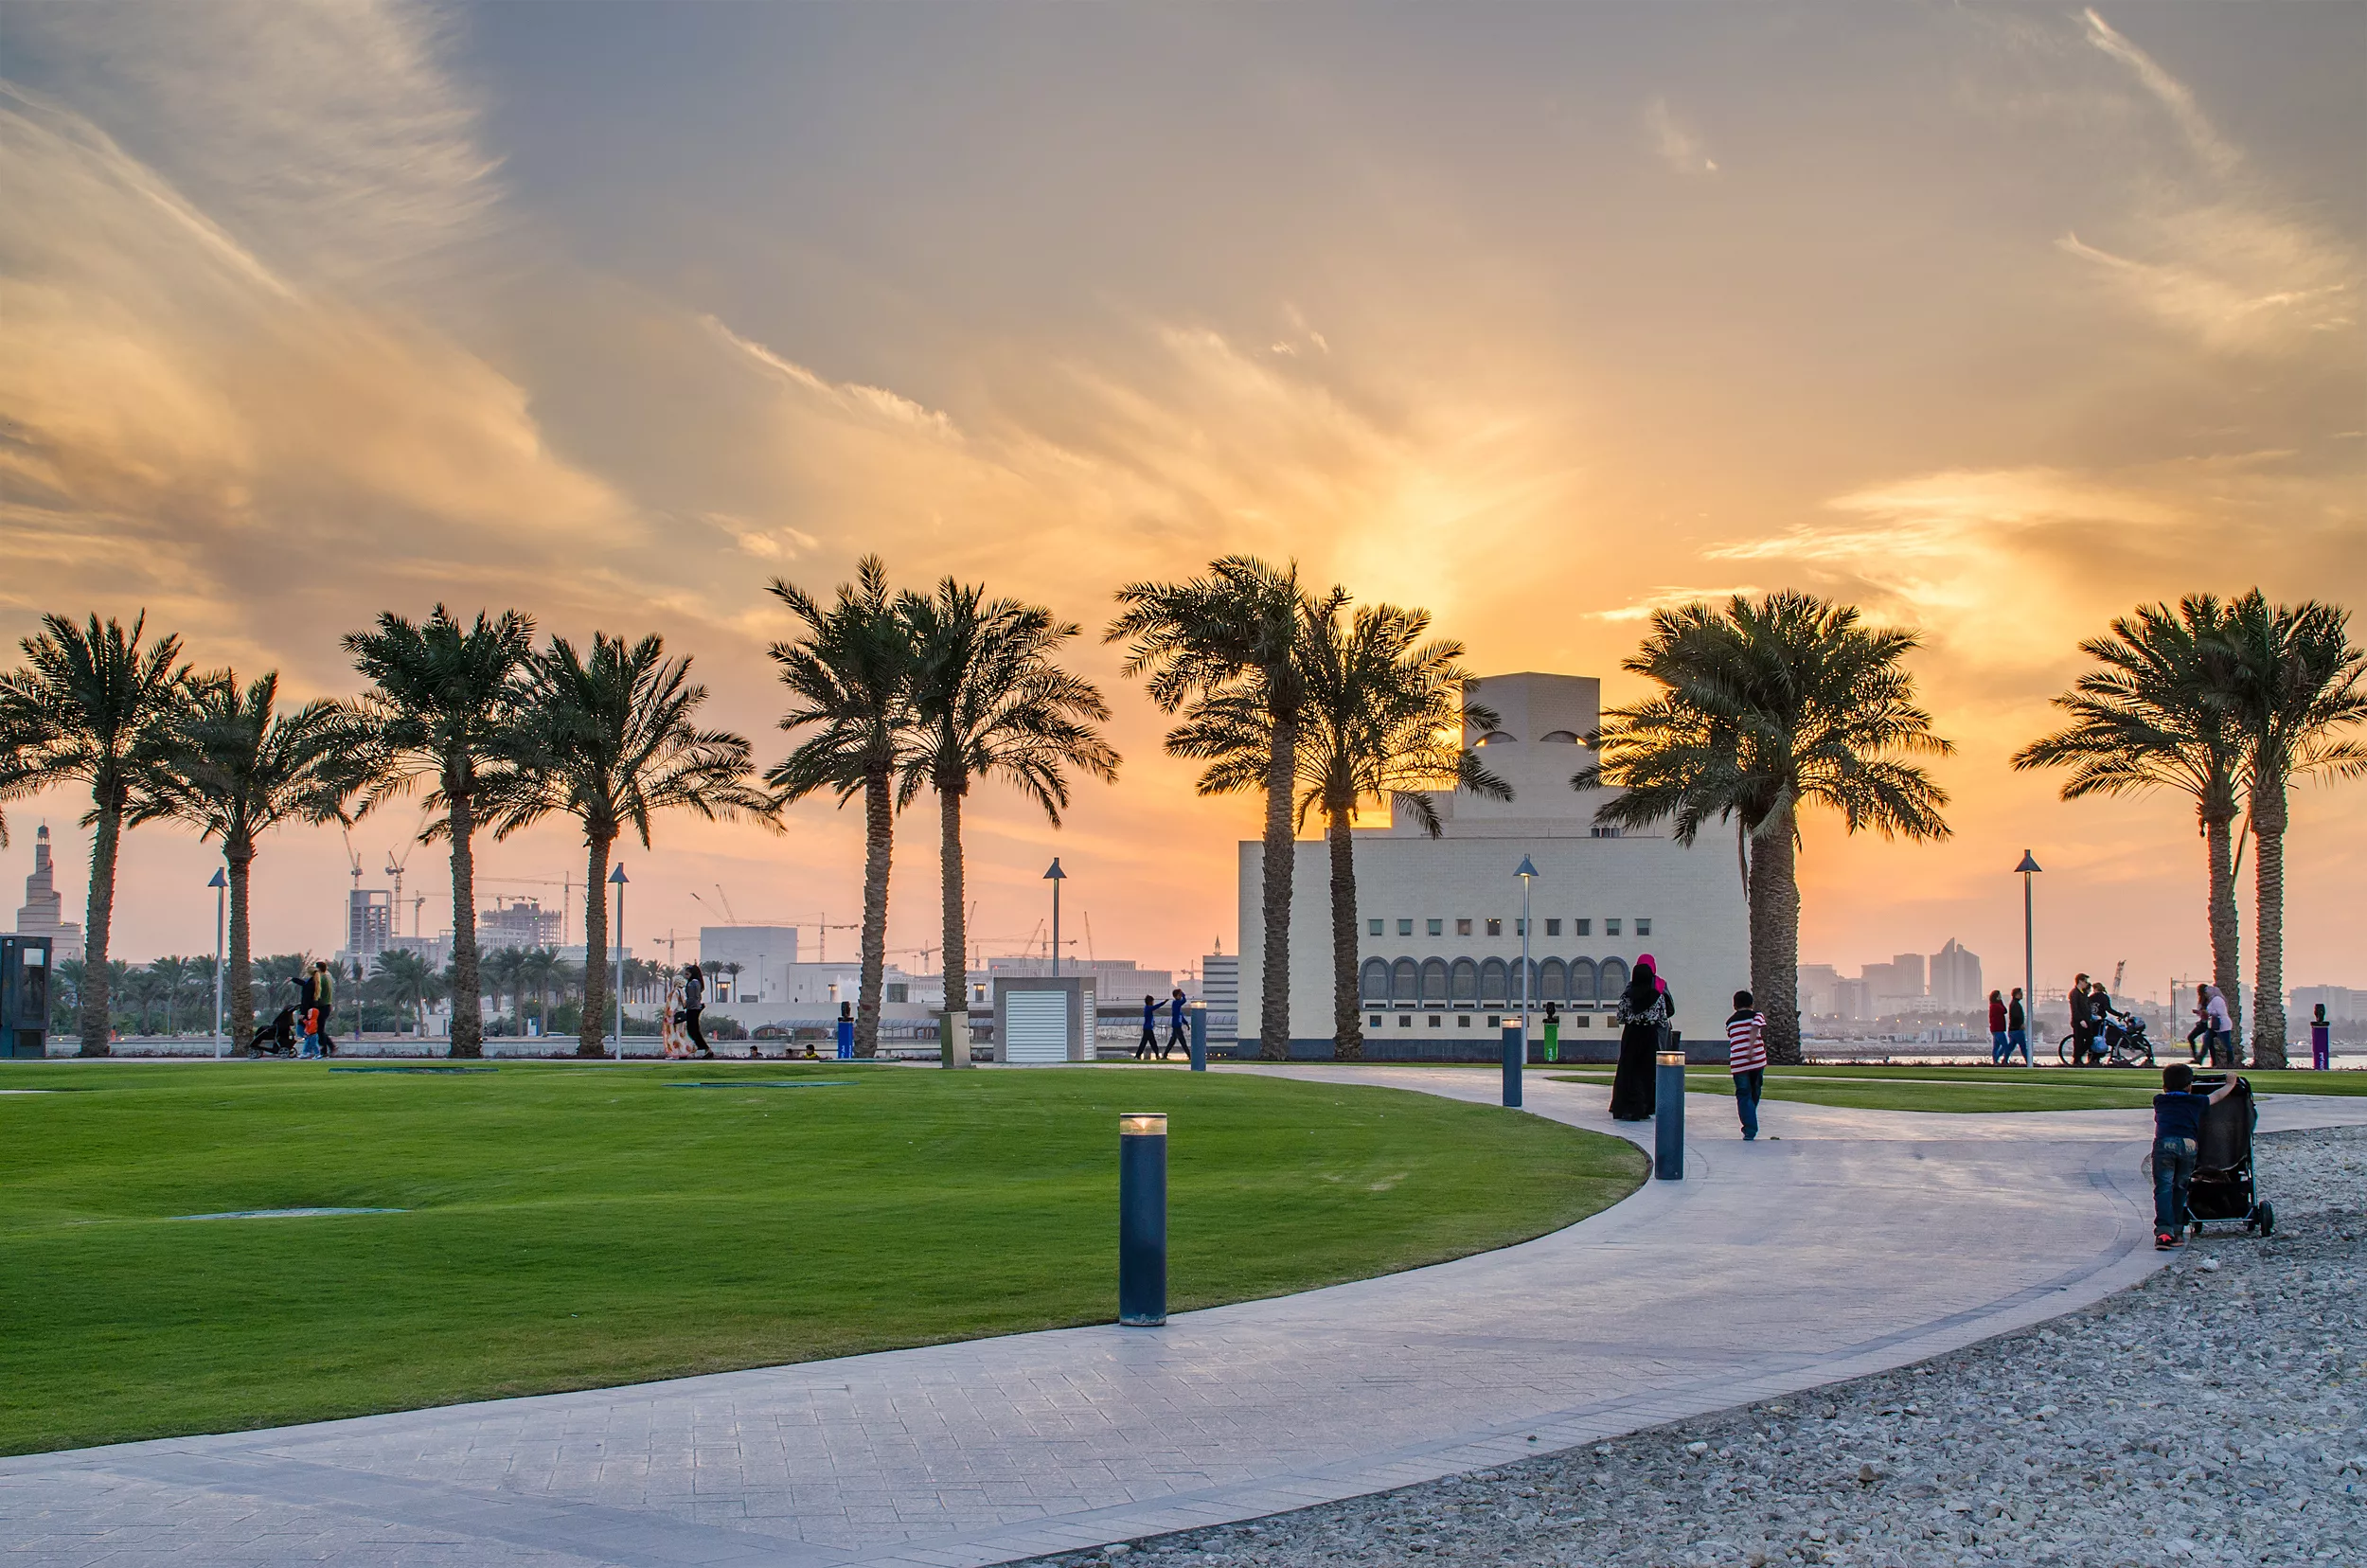 MIA Park in Qatar, Middle East | Parks - Rated 3.9